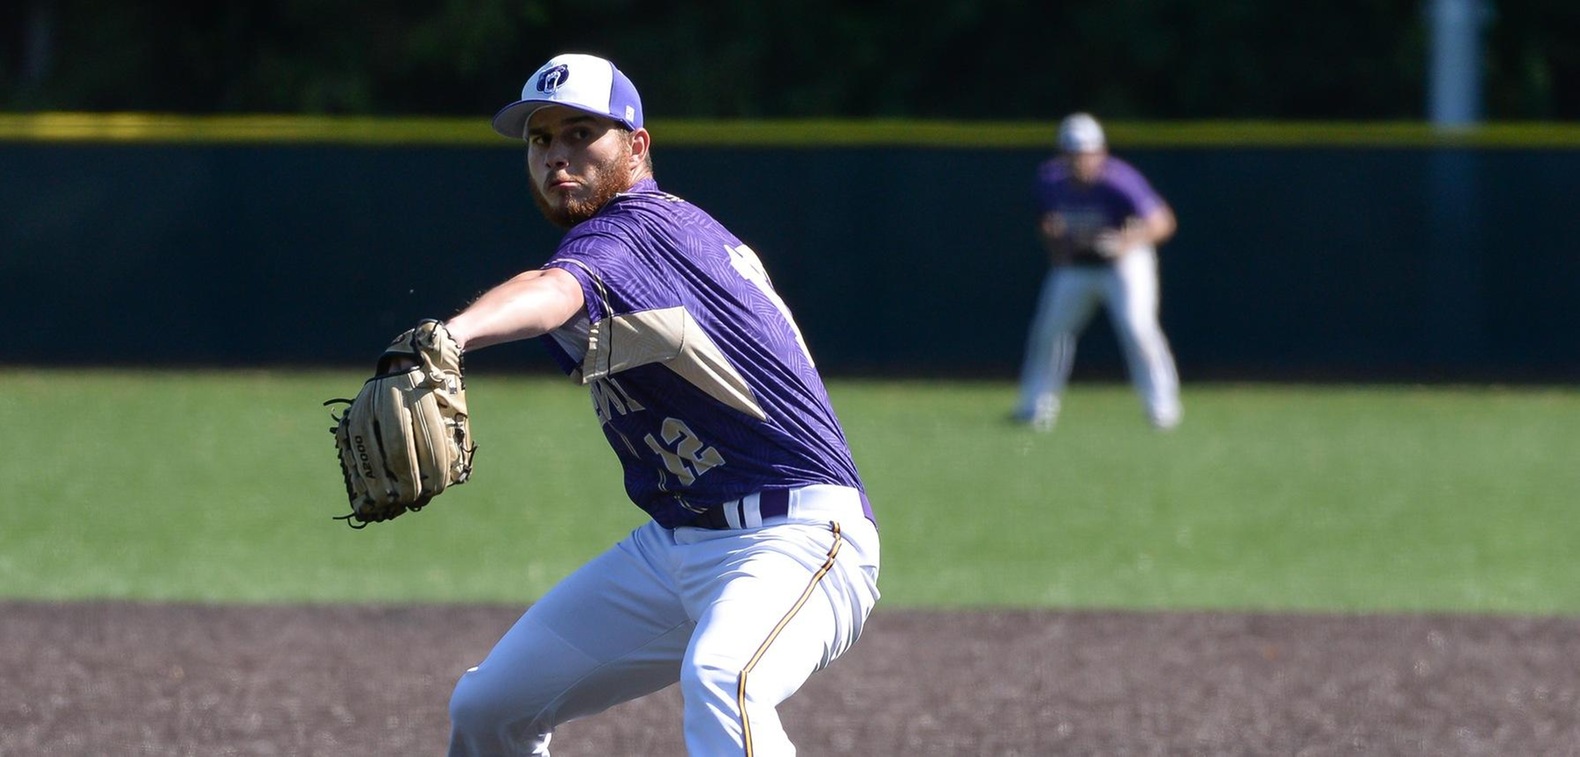 Corey Jackson struck out 13 in a complete game effort to lead BU to a 5-1 victory over Waldorf.